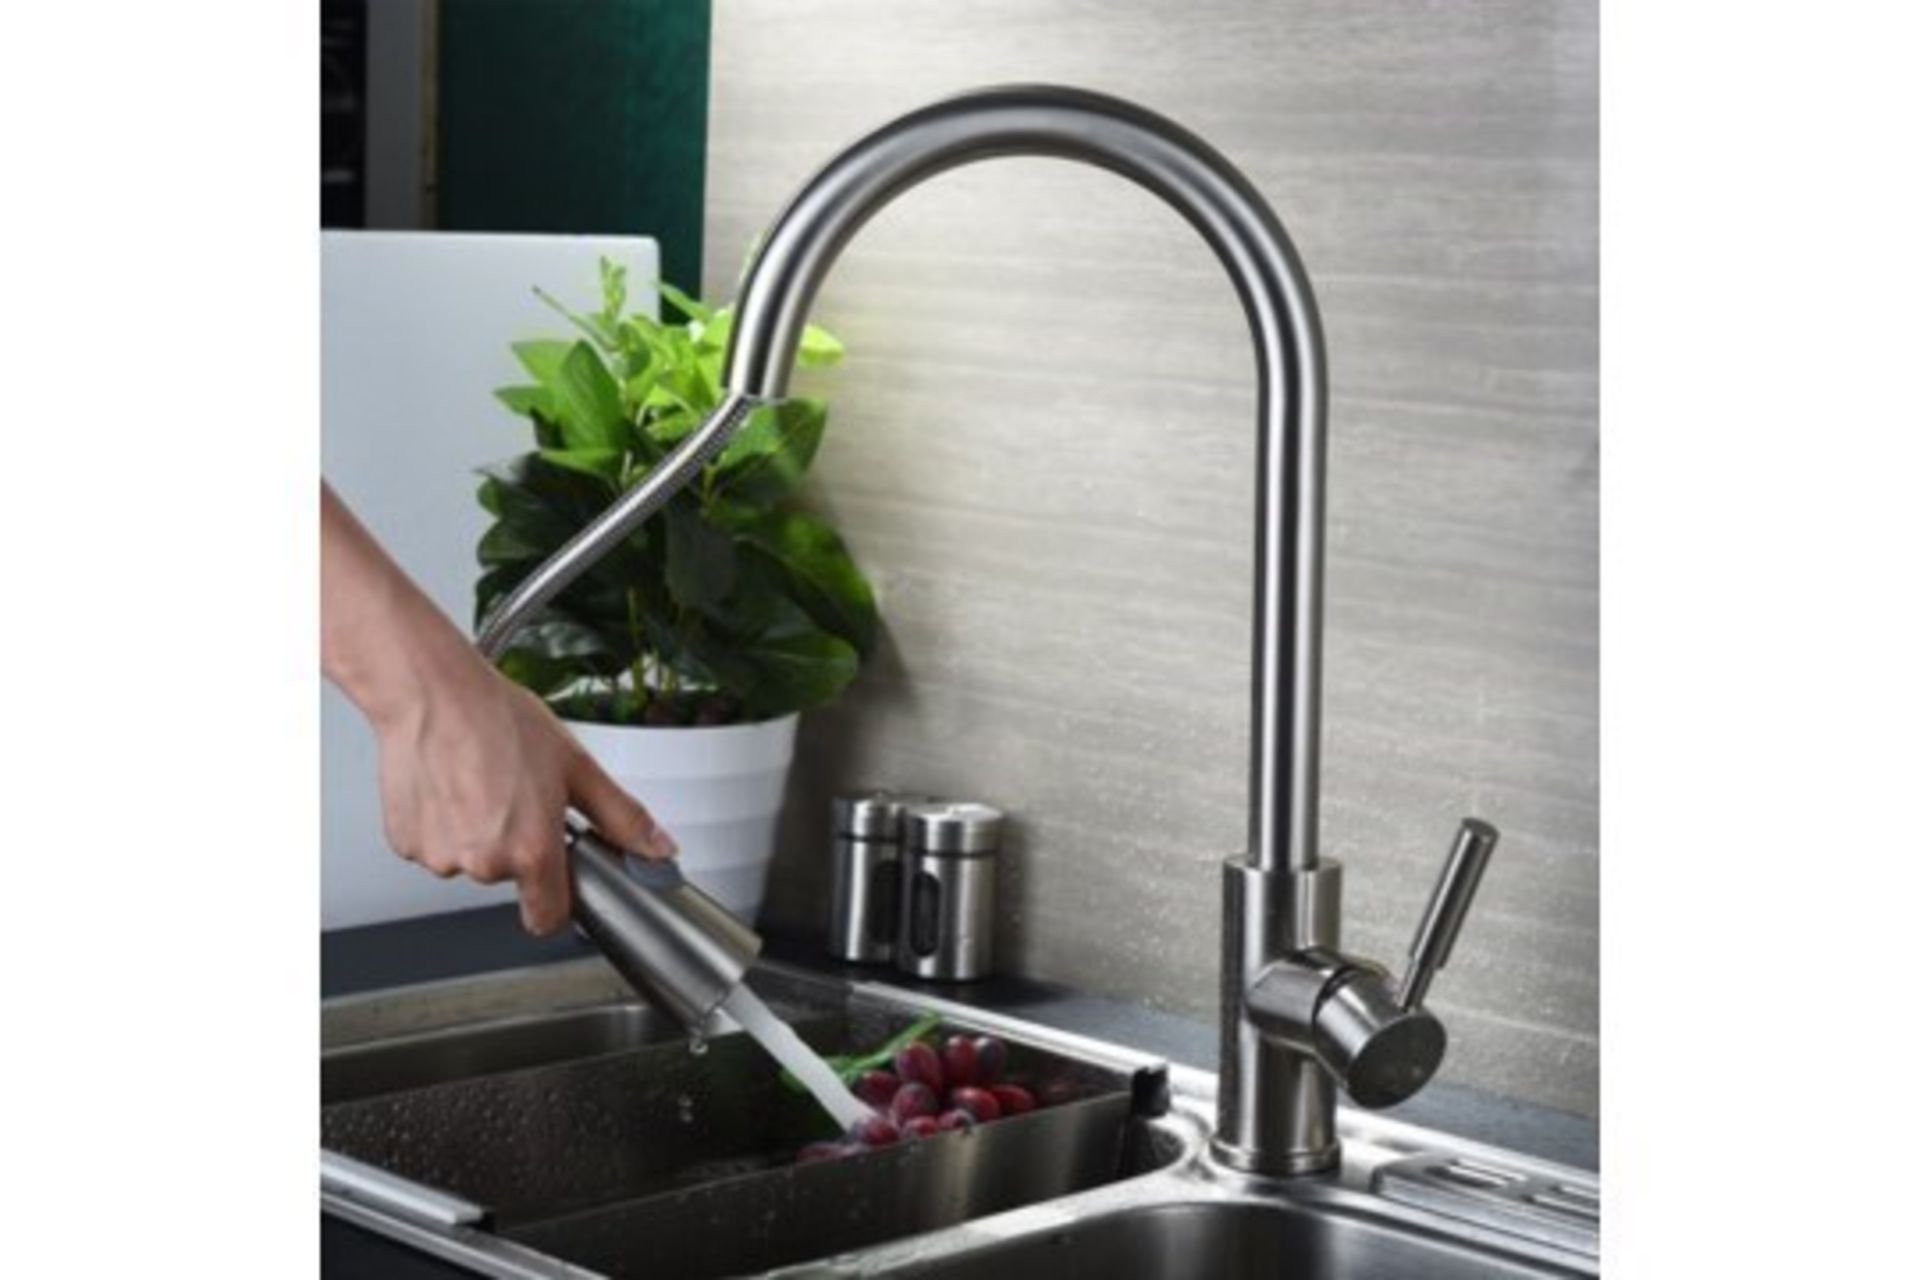 New & Boxed Della Modern Monobloc Chrome Brass Pull Out Spray Mixer Tap. RRP £299.99.This Tap ... - Image 2 of 3